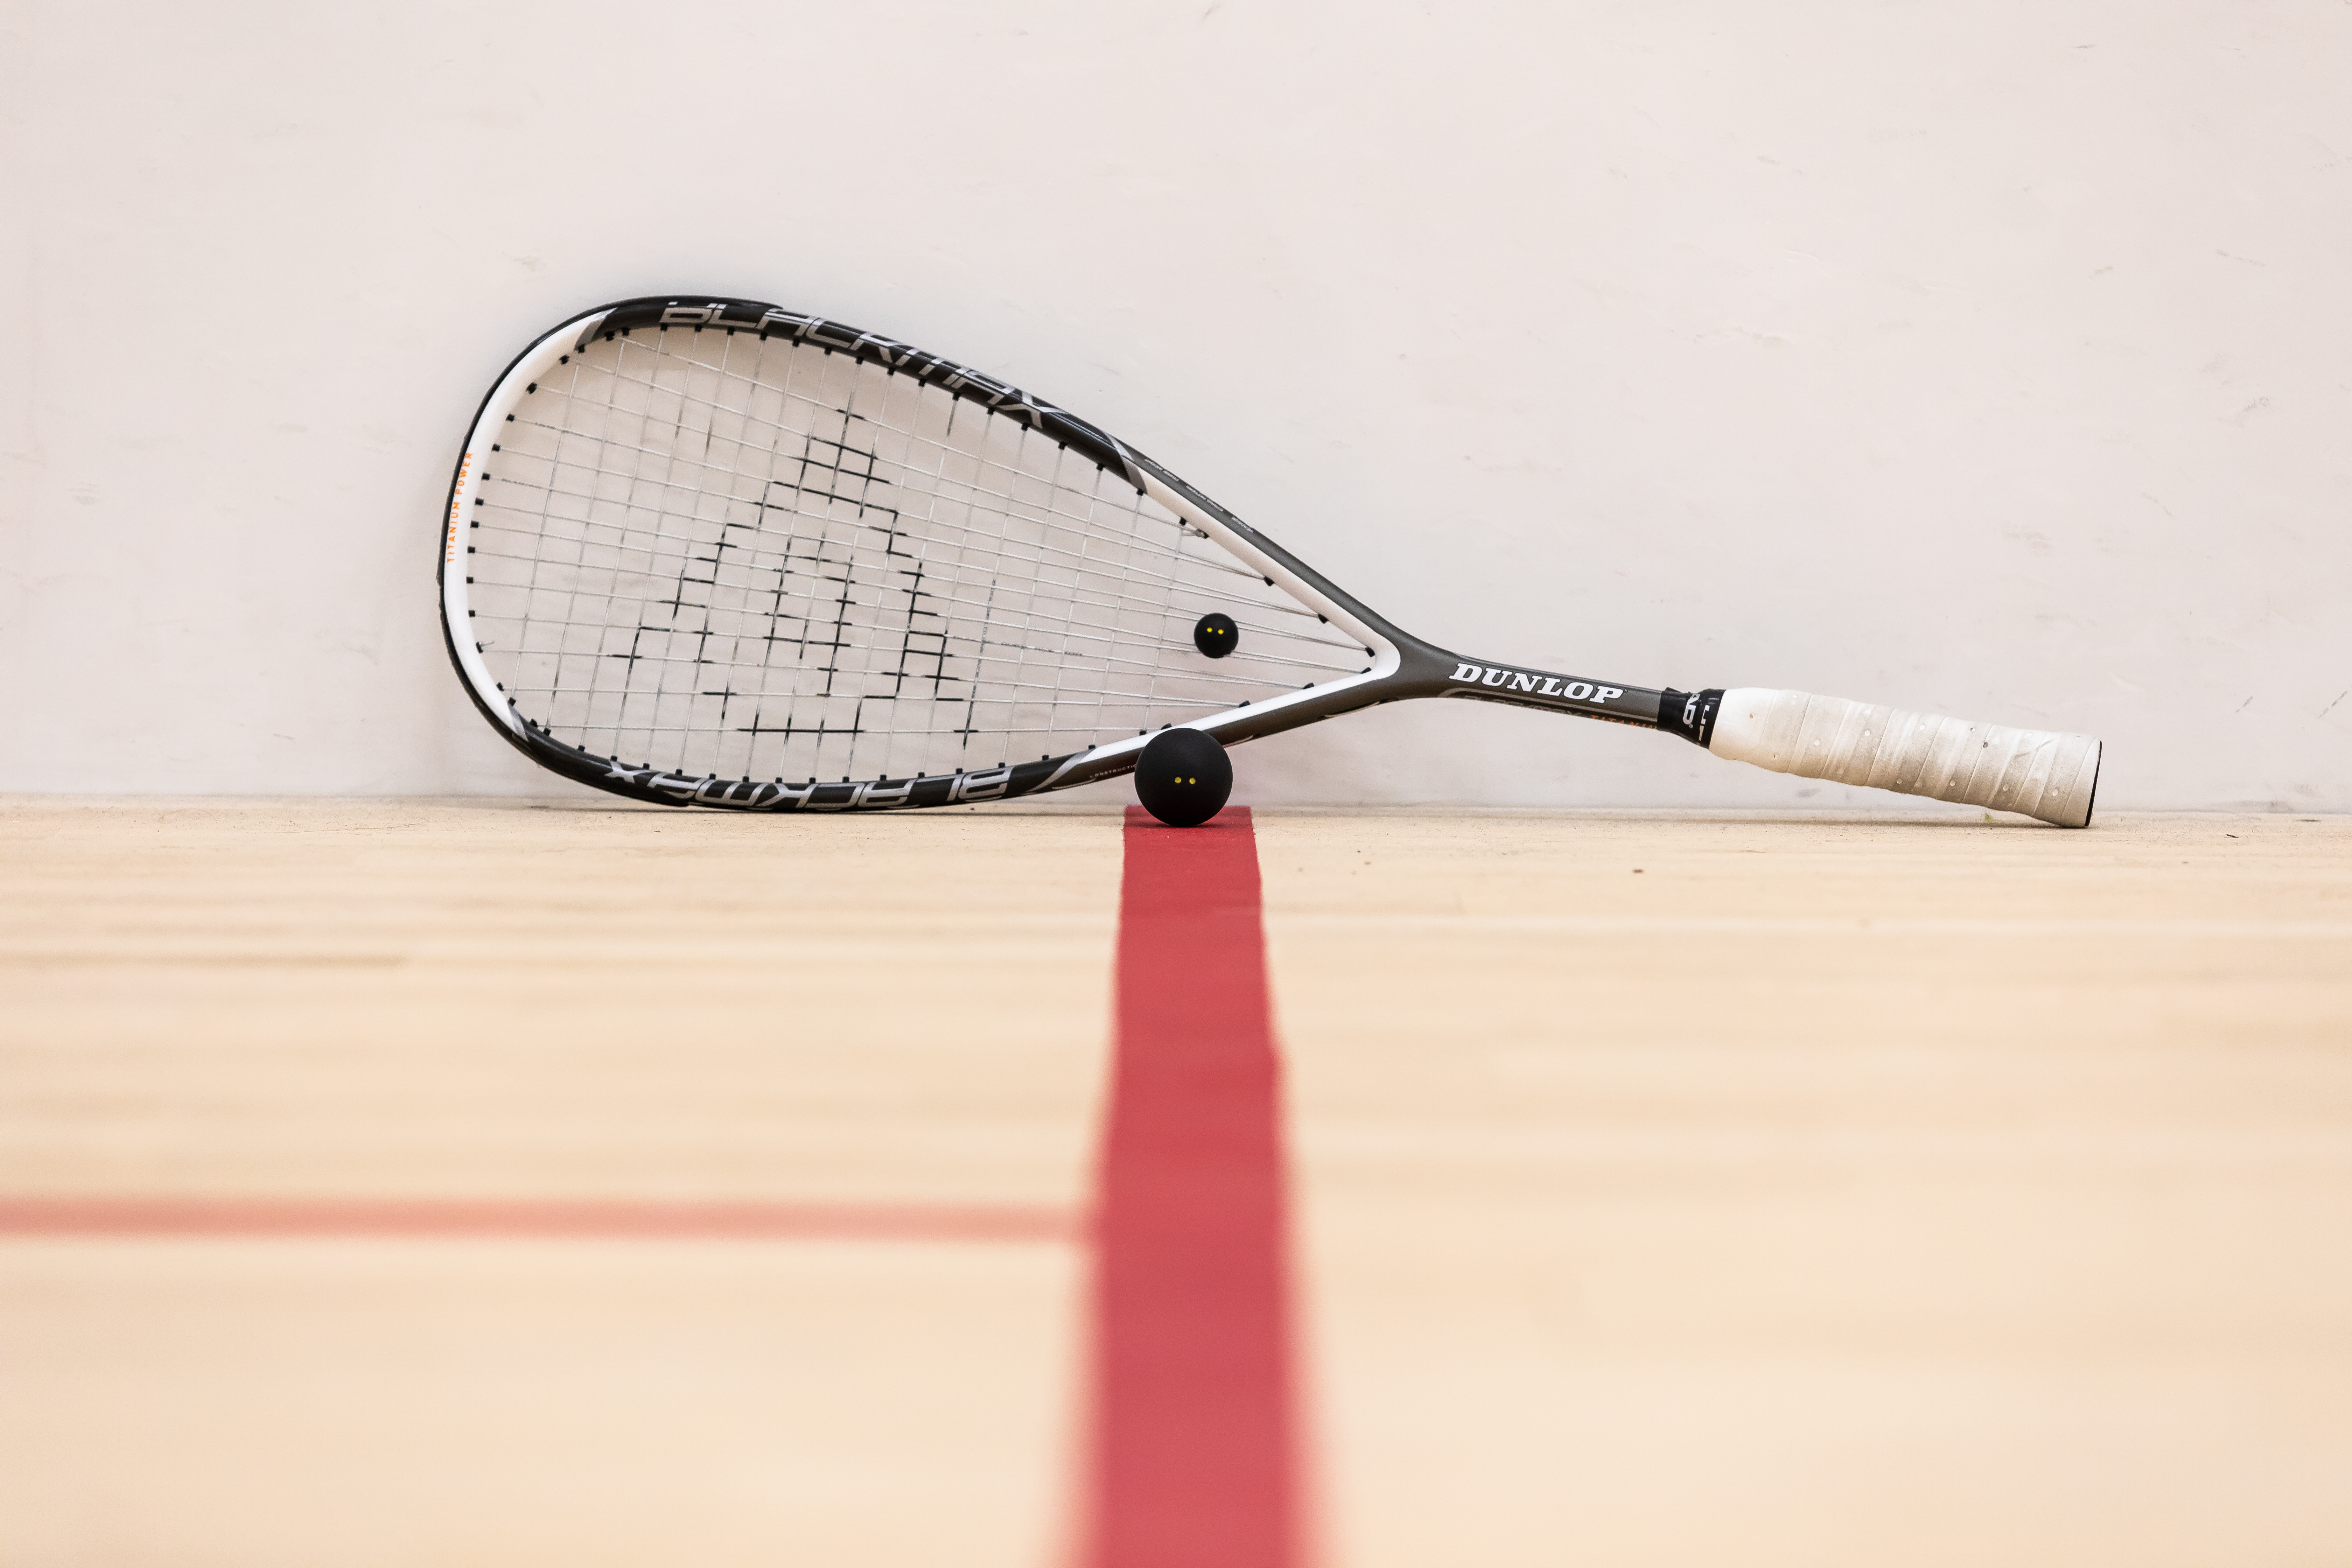 A squash racket and a ball on a court